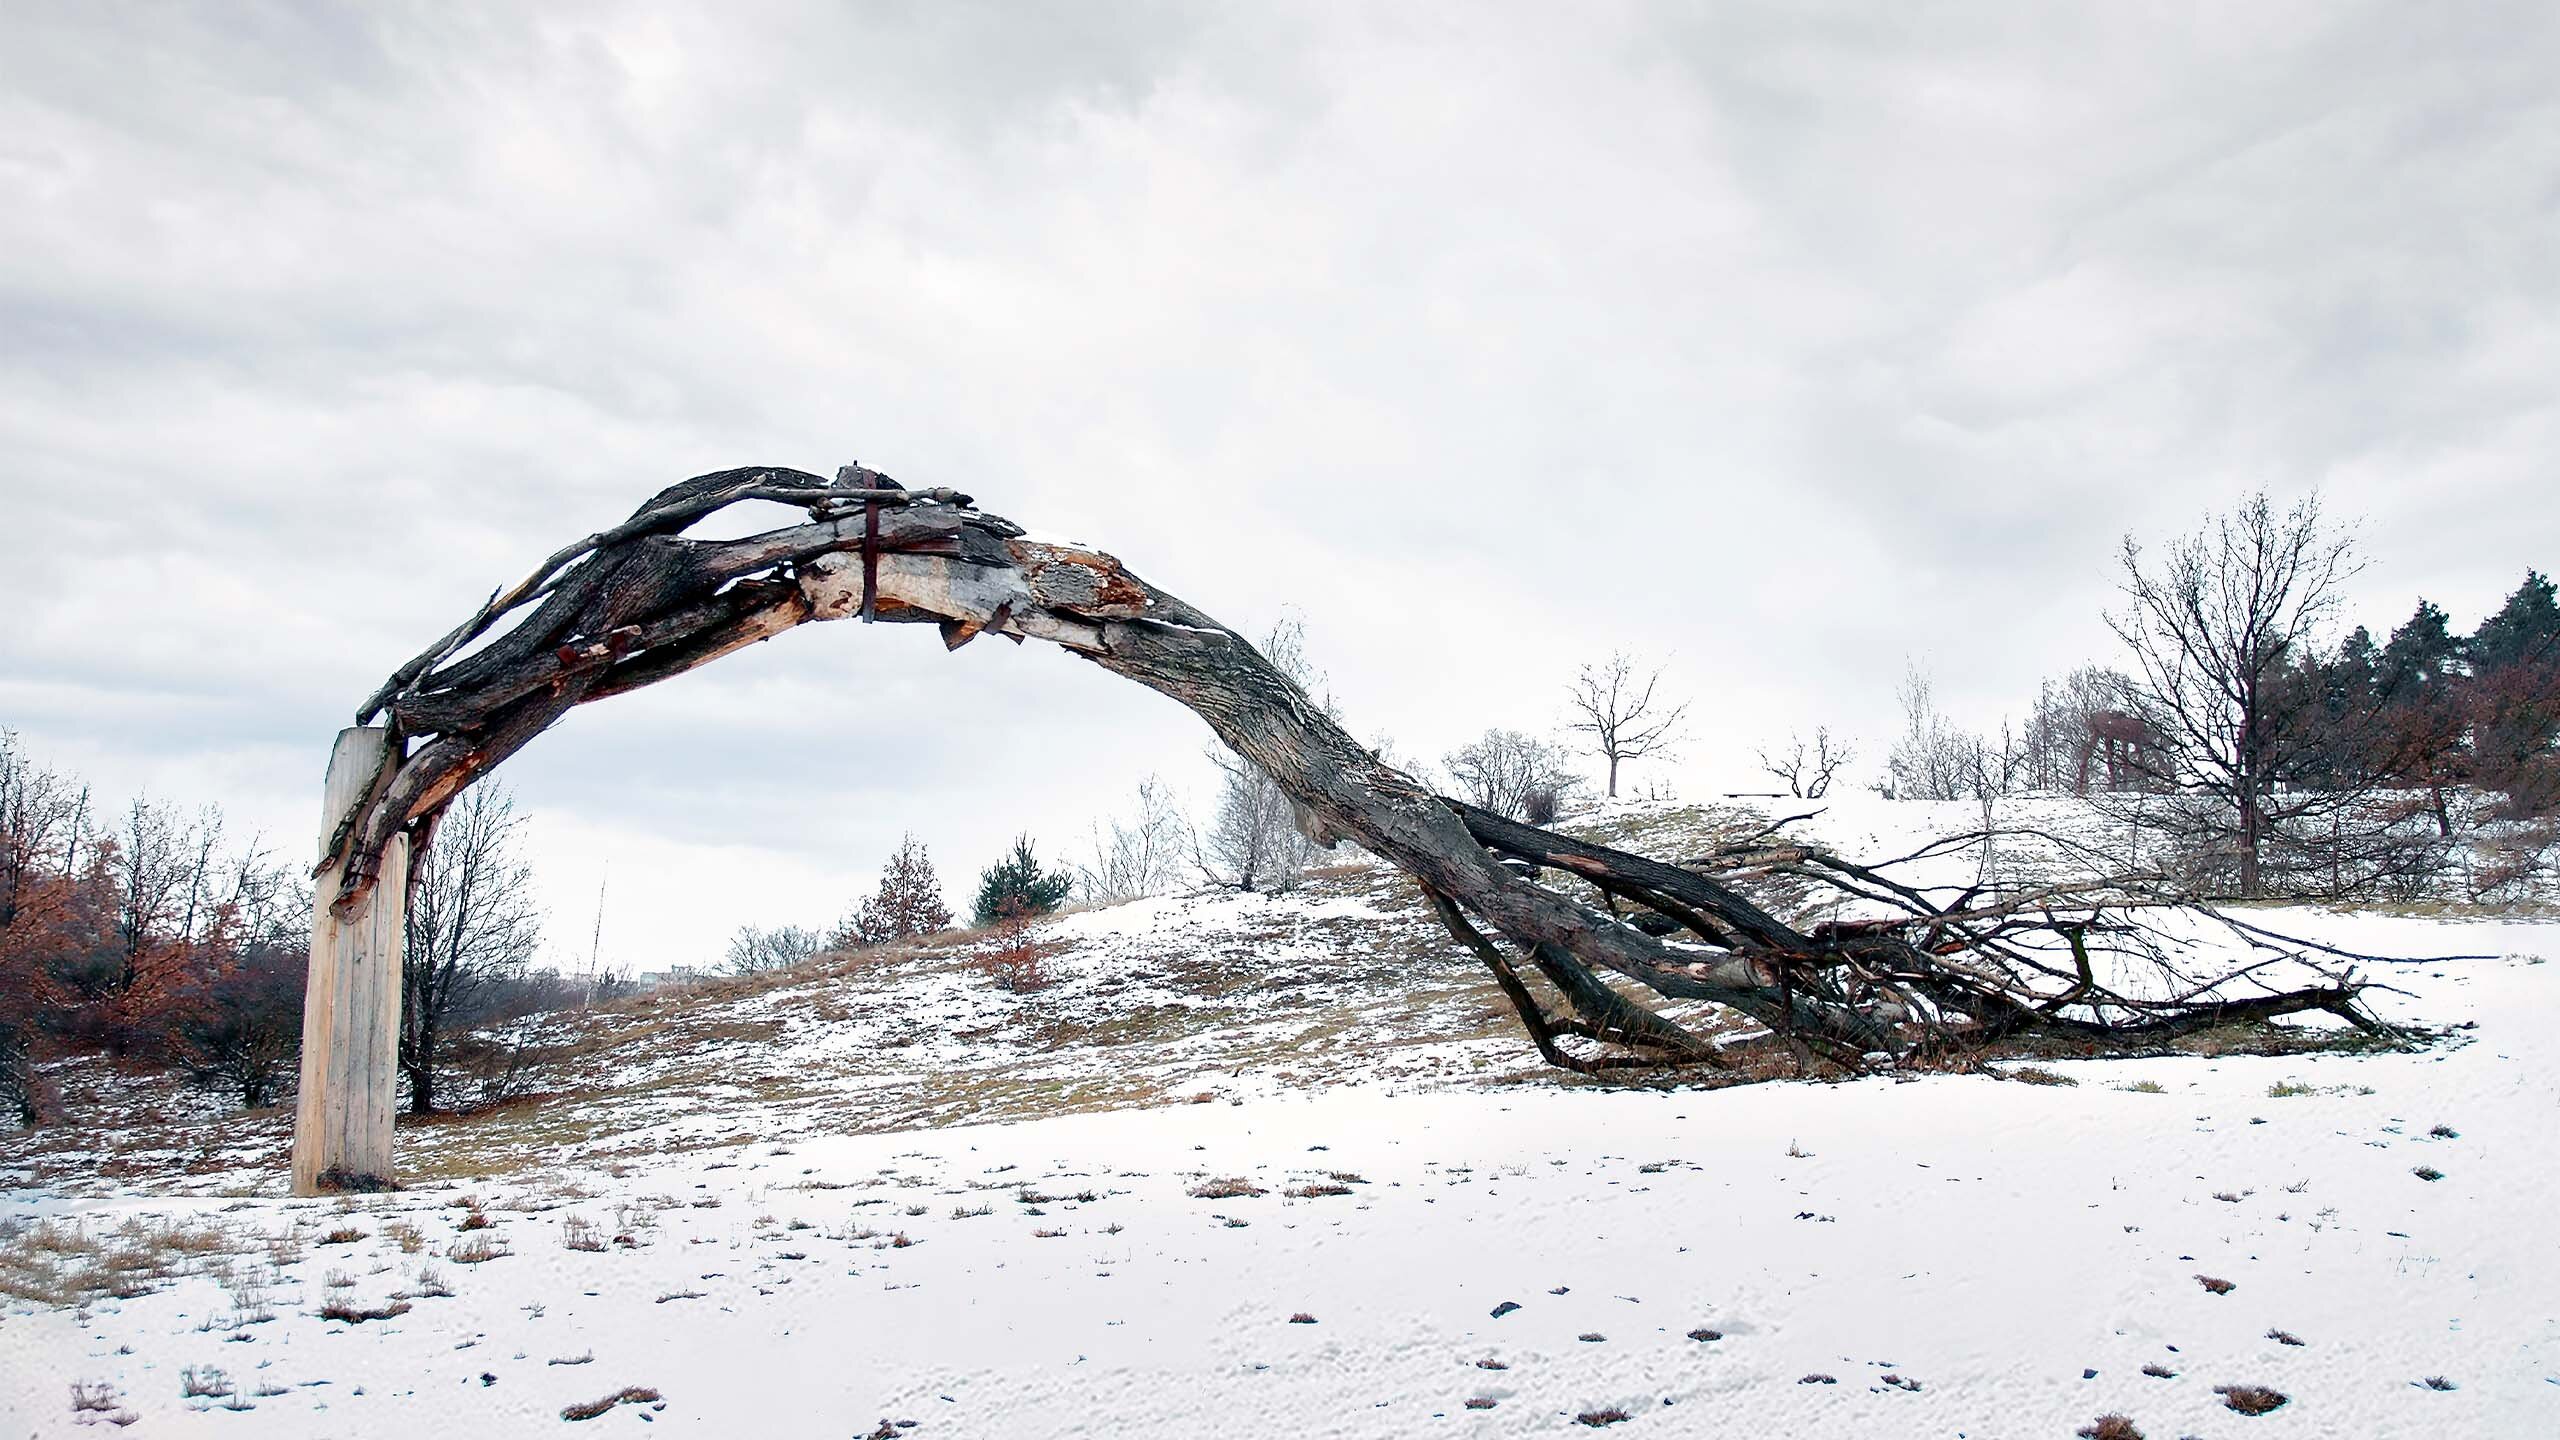 Monumental wooden sculpture Fade Tree by Daniel Paul: Withered tree amidst snowy slope. Artwork symbolizes human impact on nature's destruction.